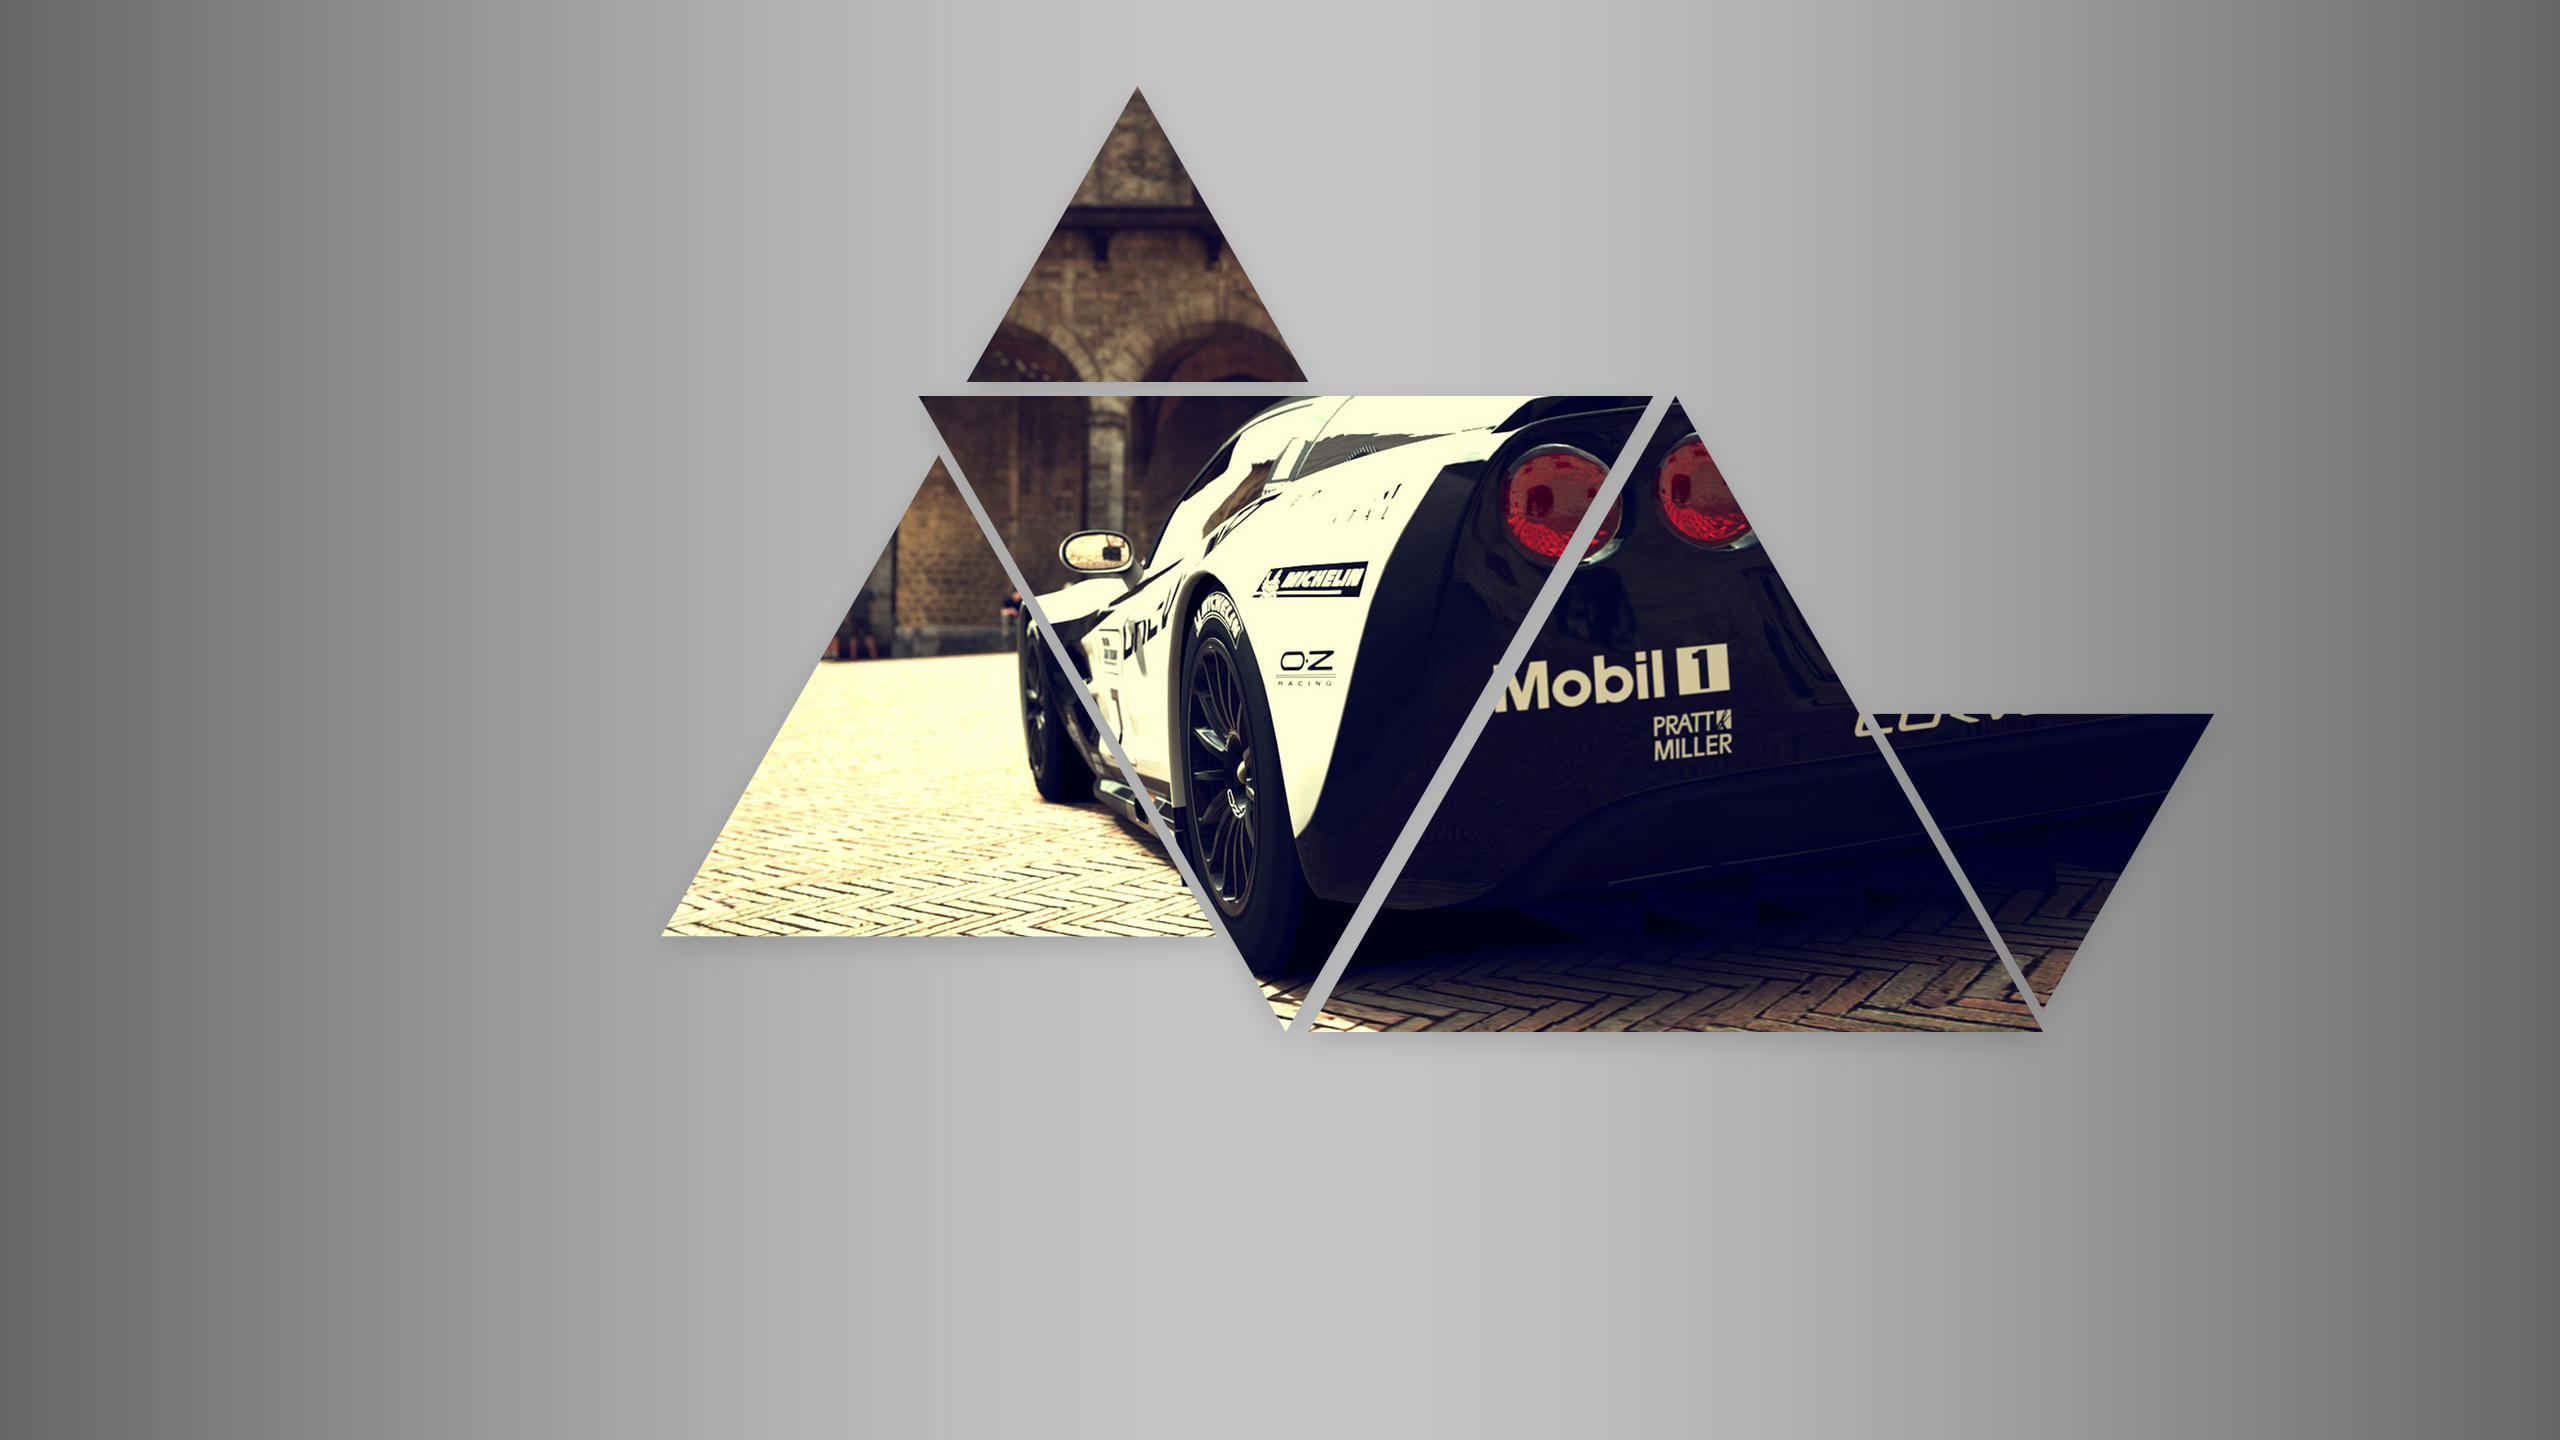 General 2560x1440 car triangle vehicle simple background